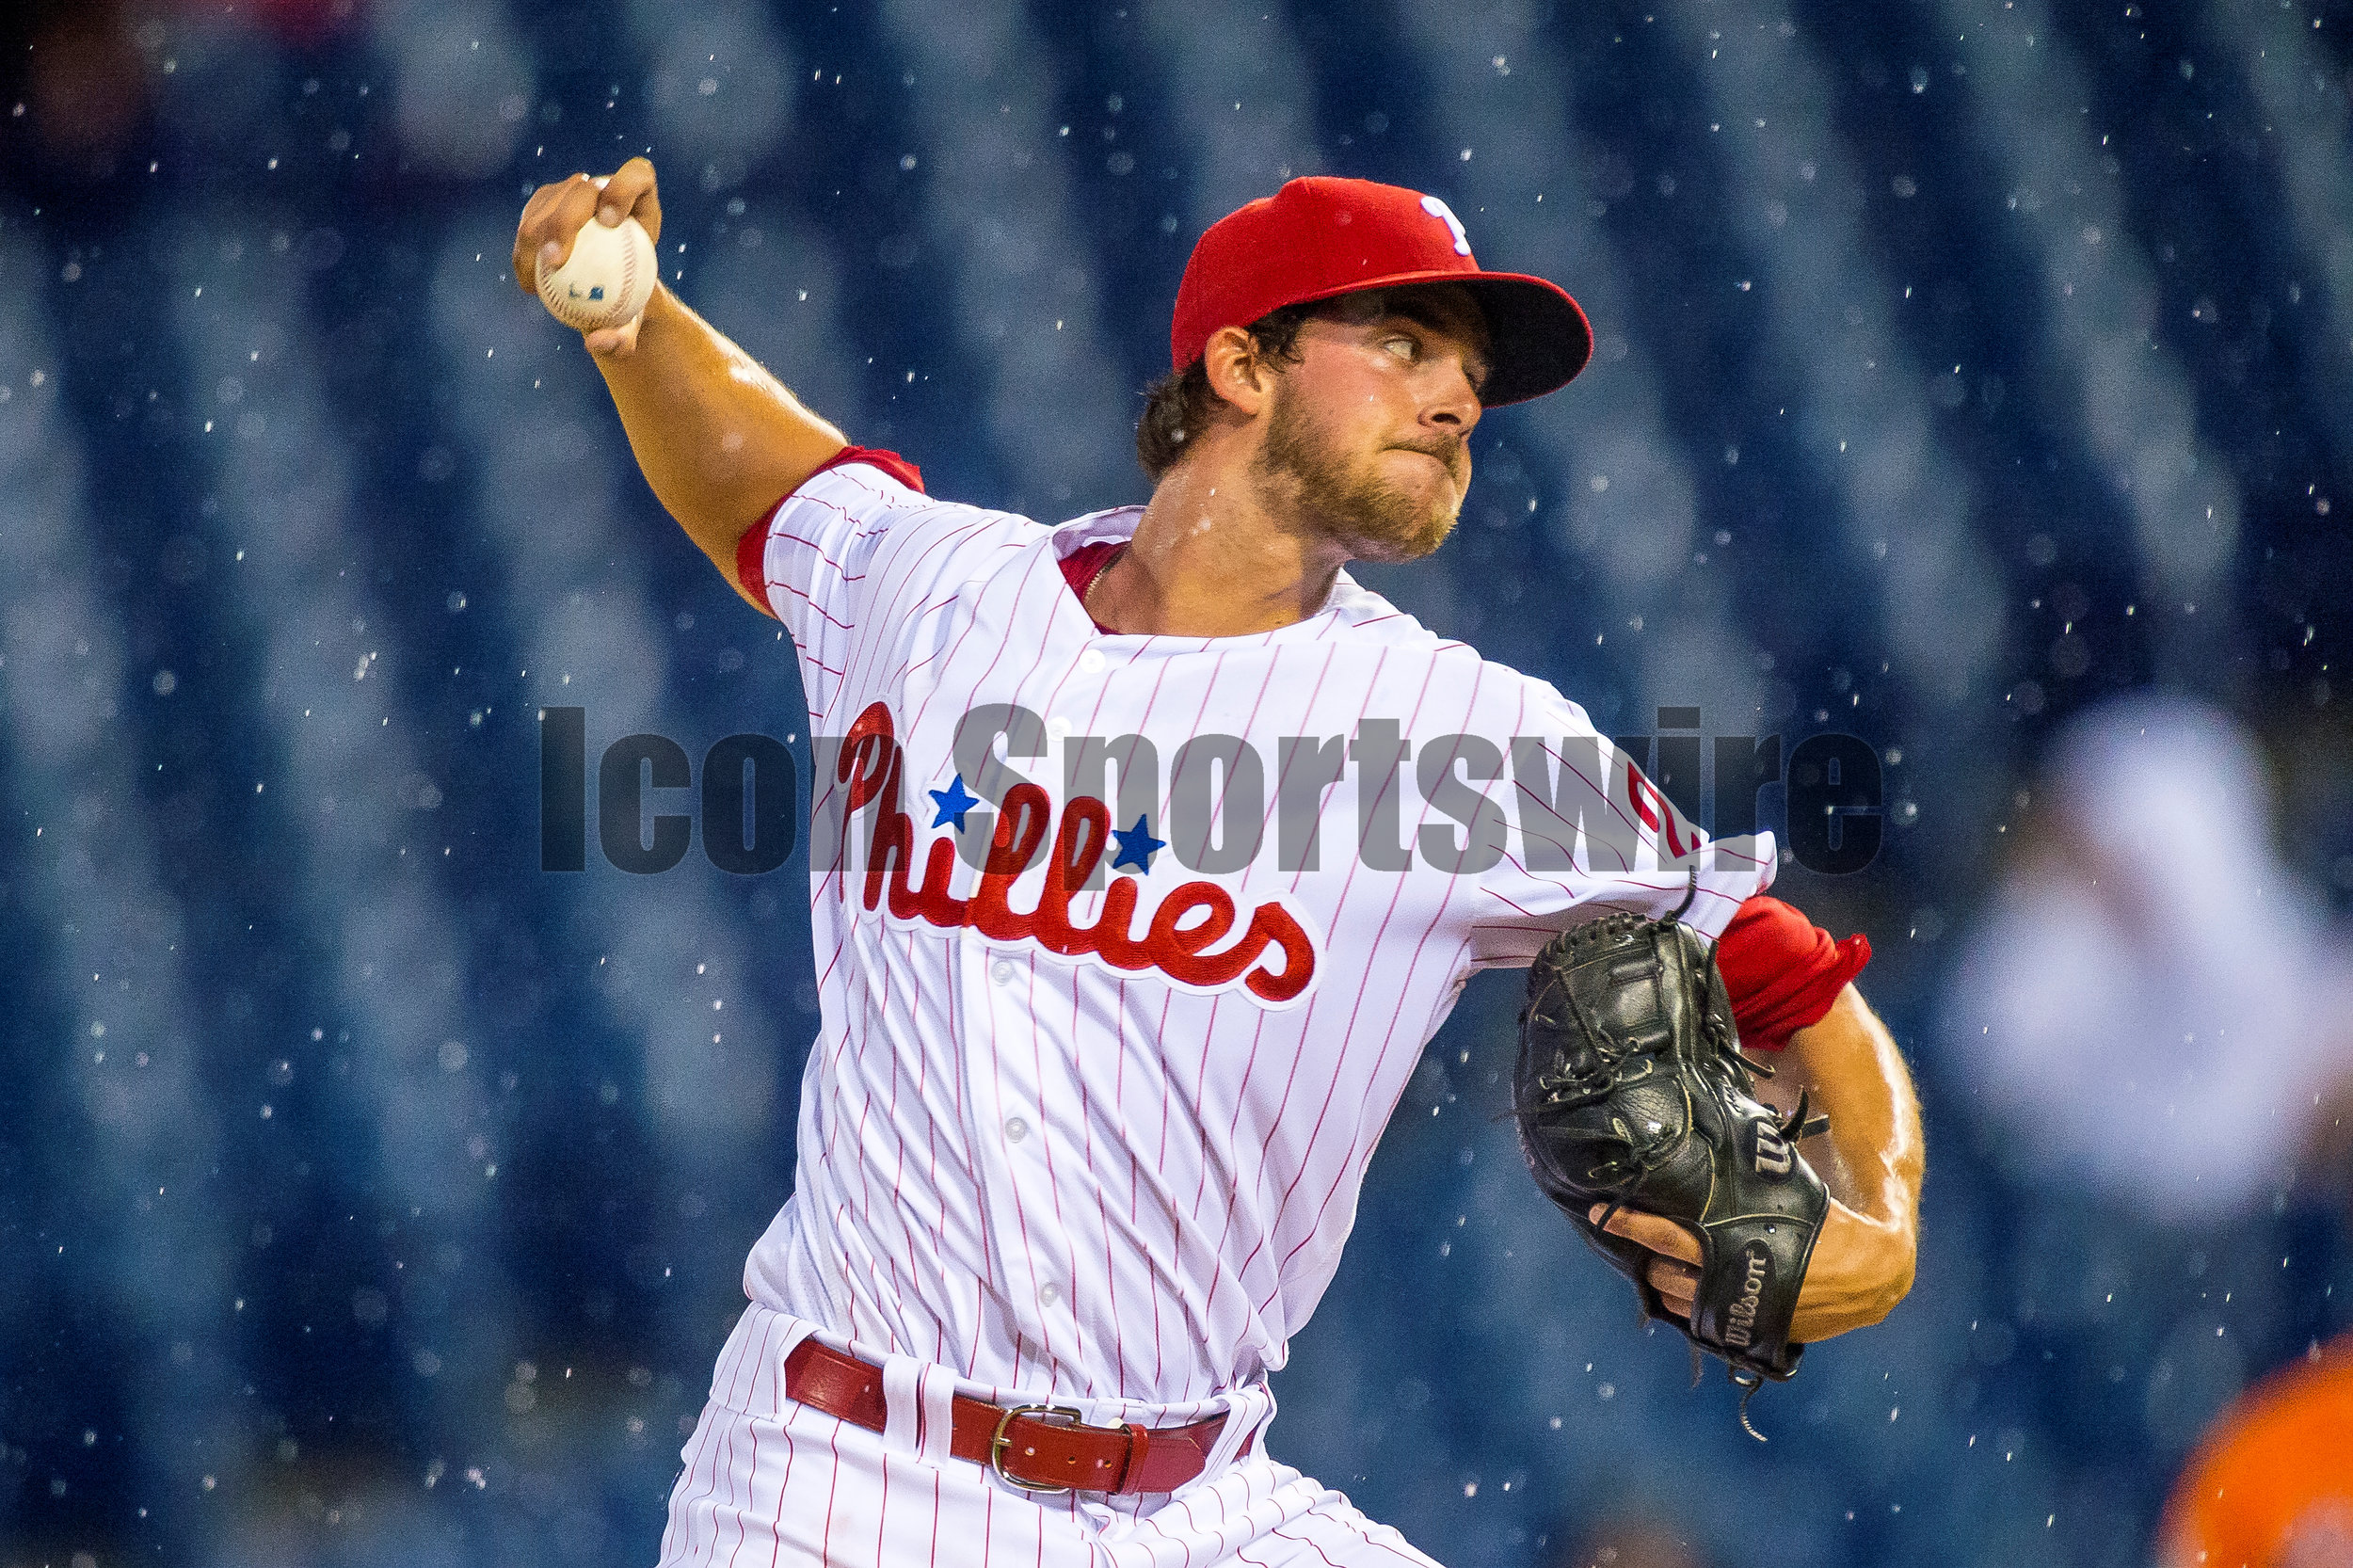  1 April 2016: Philadelphia Phillies starting pitcher Aaron Nola (27) winds up to pitch in the rain during the MLB Spring Training game between the Baltimore Orioles and the Philadelphia Phillies played at Citizens Bank Park in Philadelphia, PA. (Pho